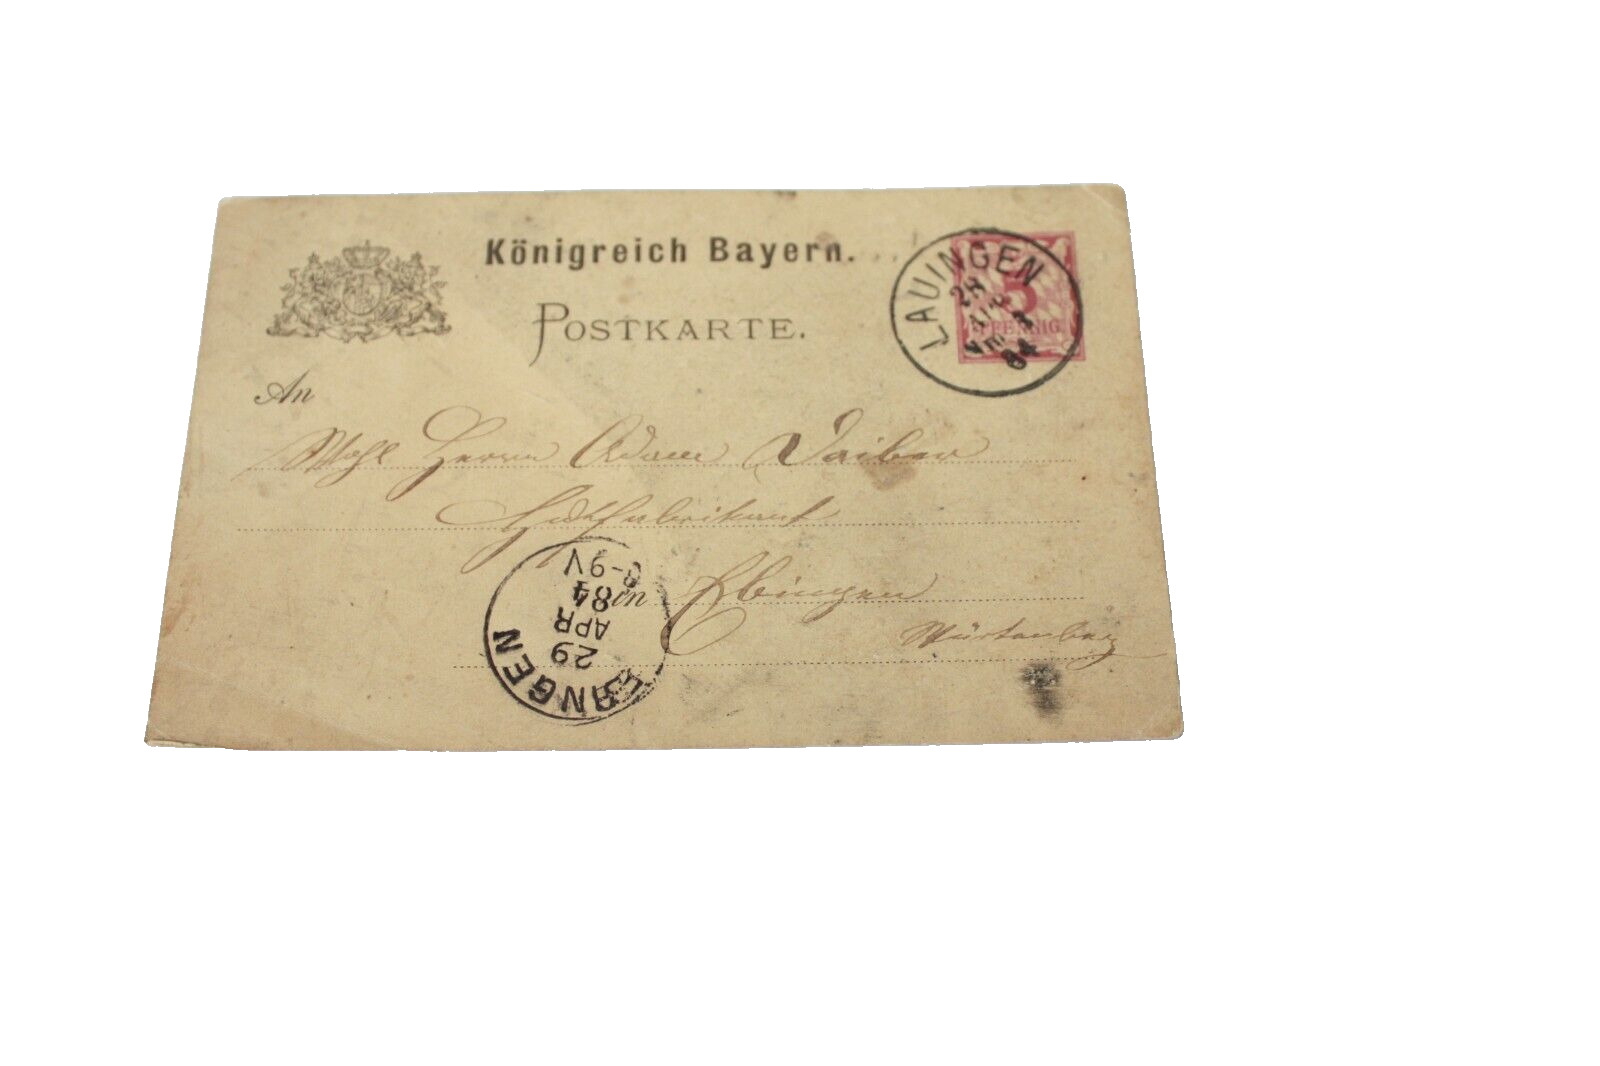 Antique 1884 German Post Card Used with Postal Indicia